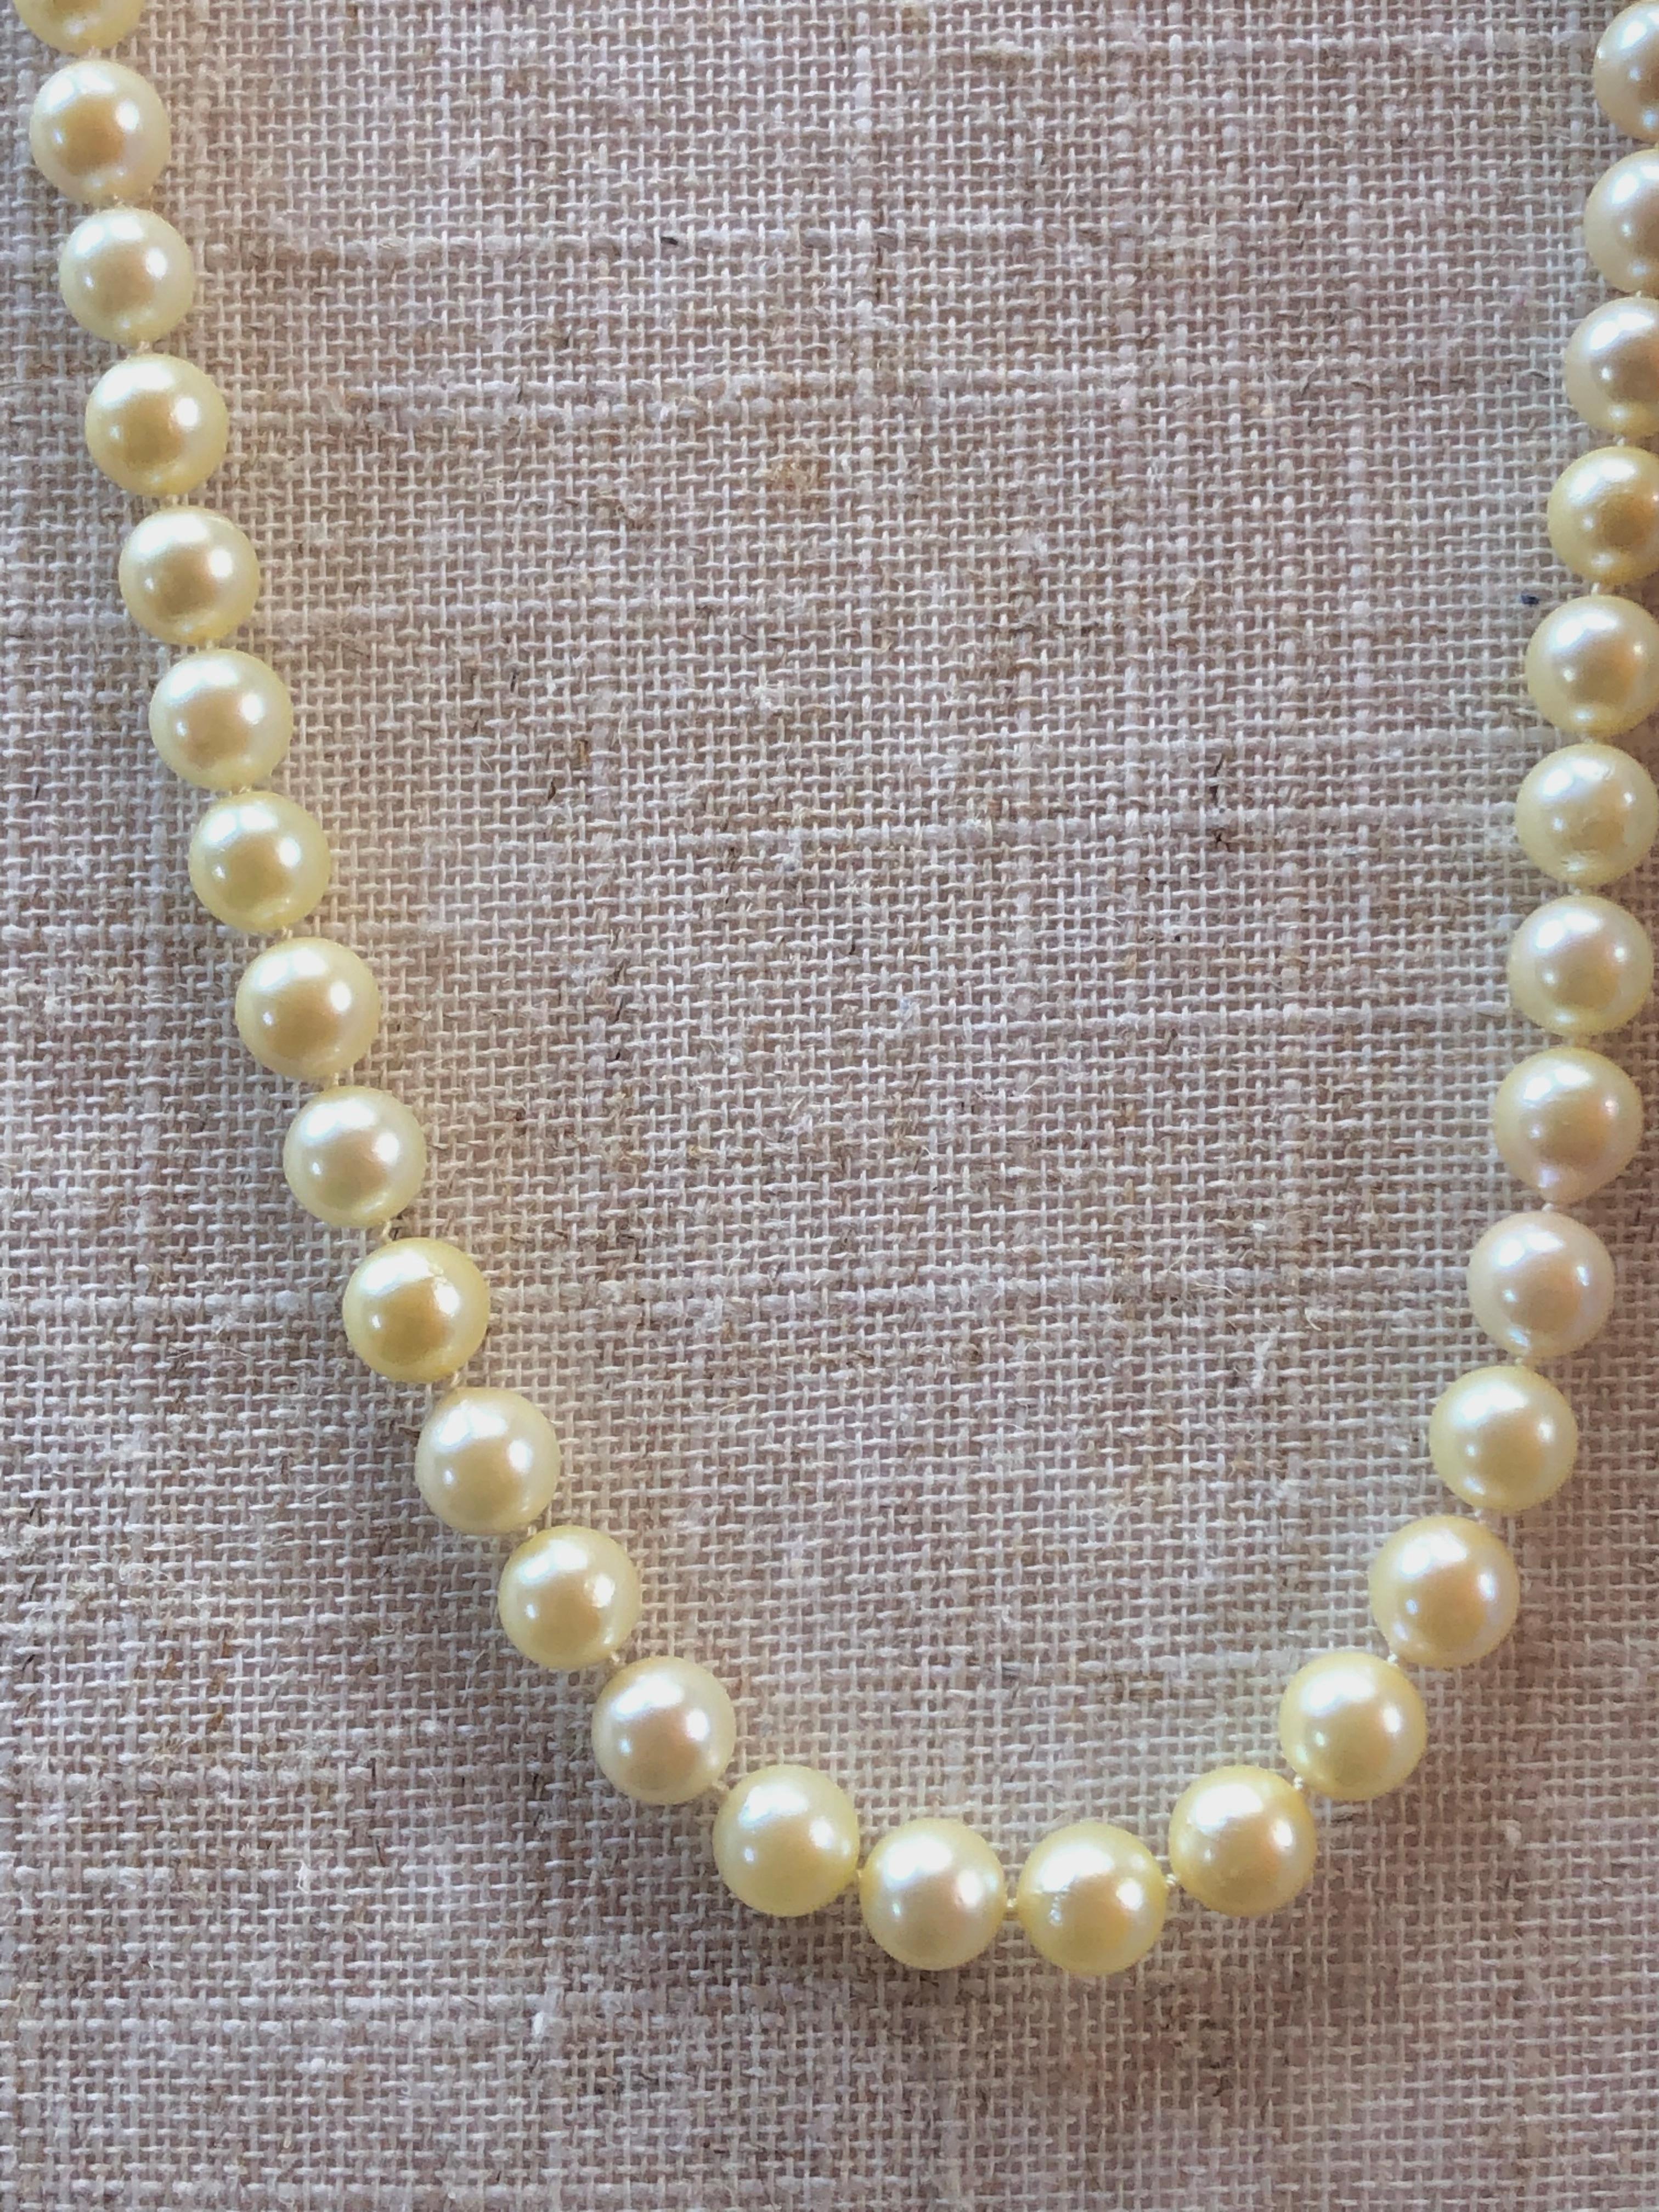 are akoya pearls saltwater or freshwater